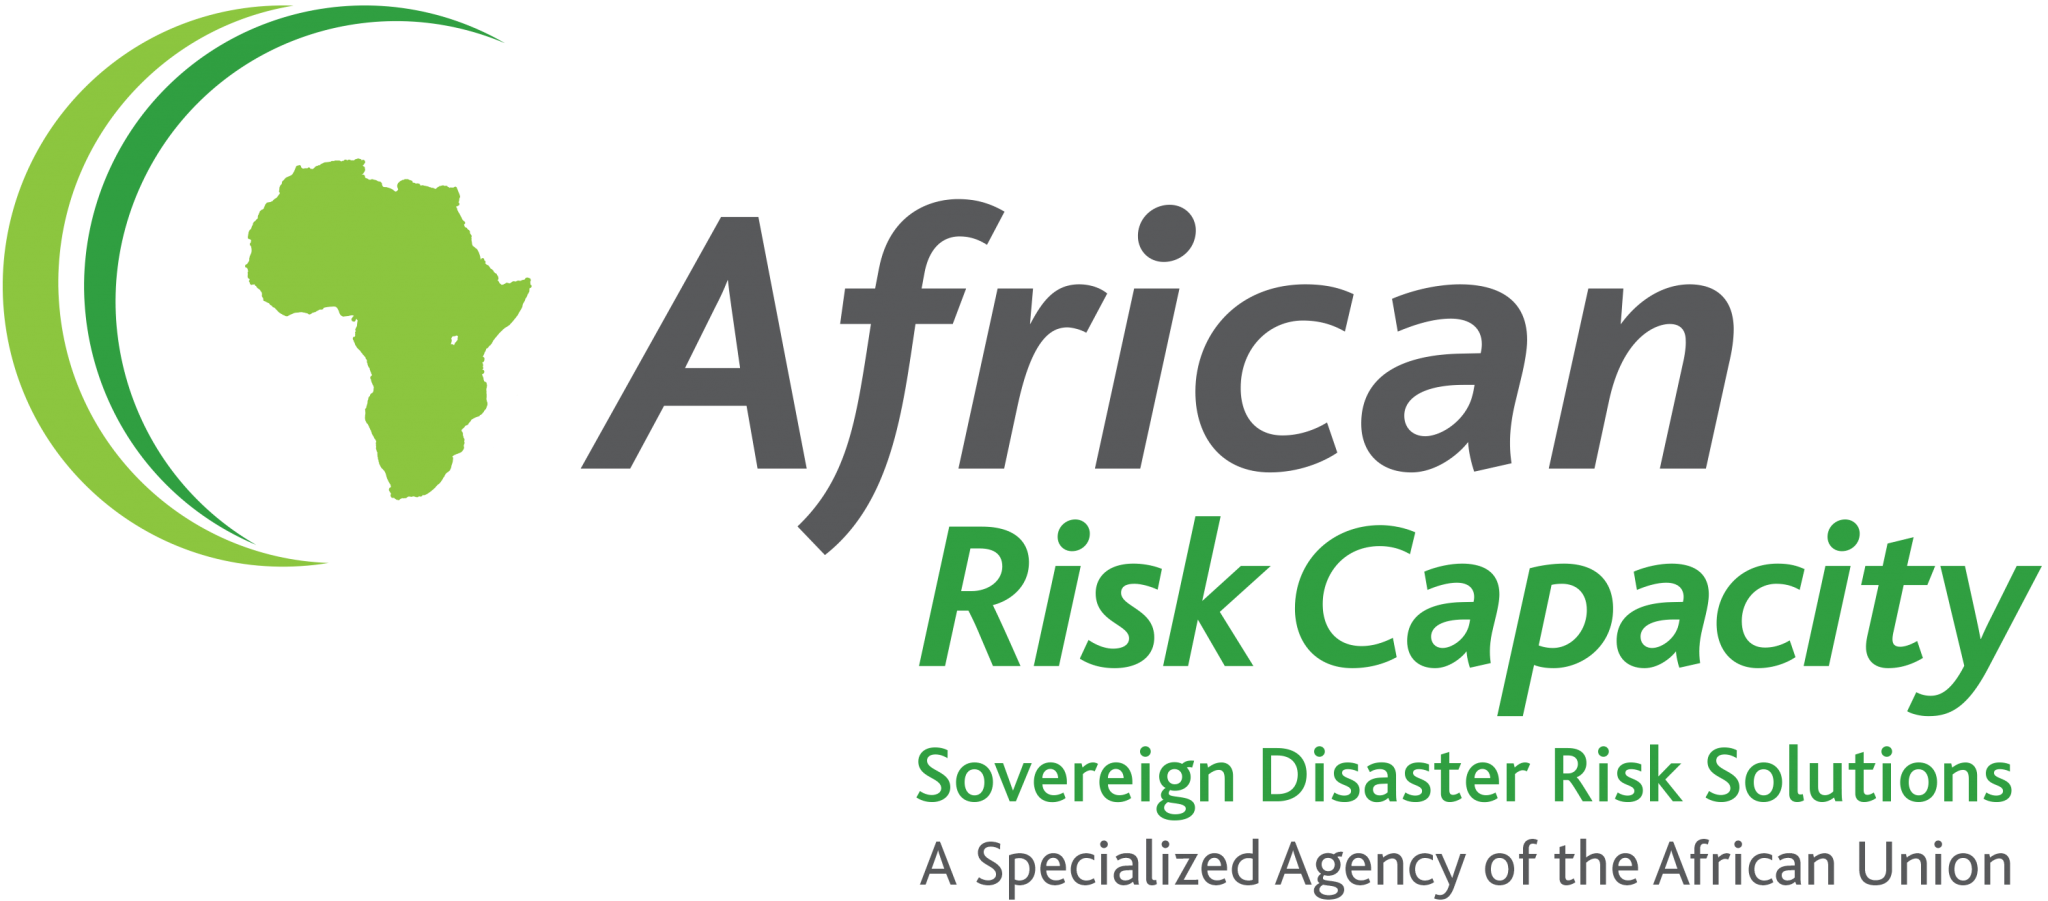 Africa Risk Capacity Limited (ARC)